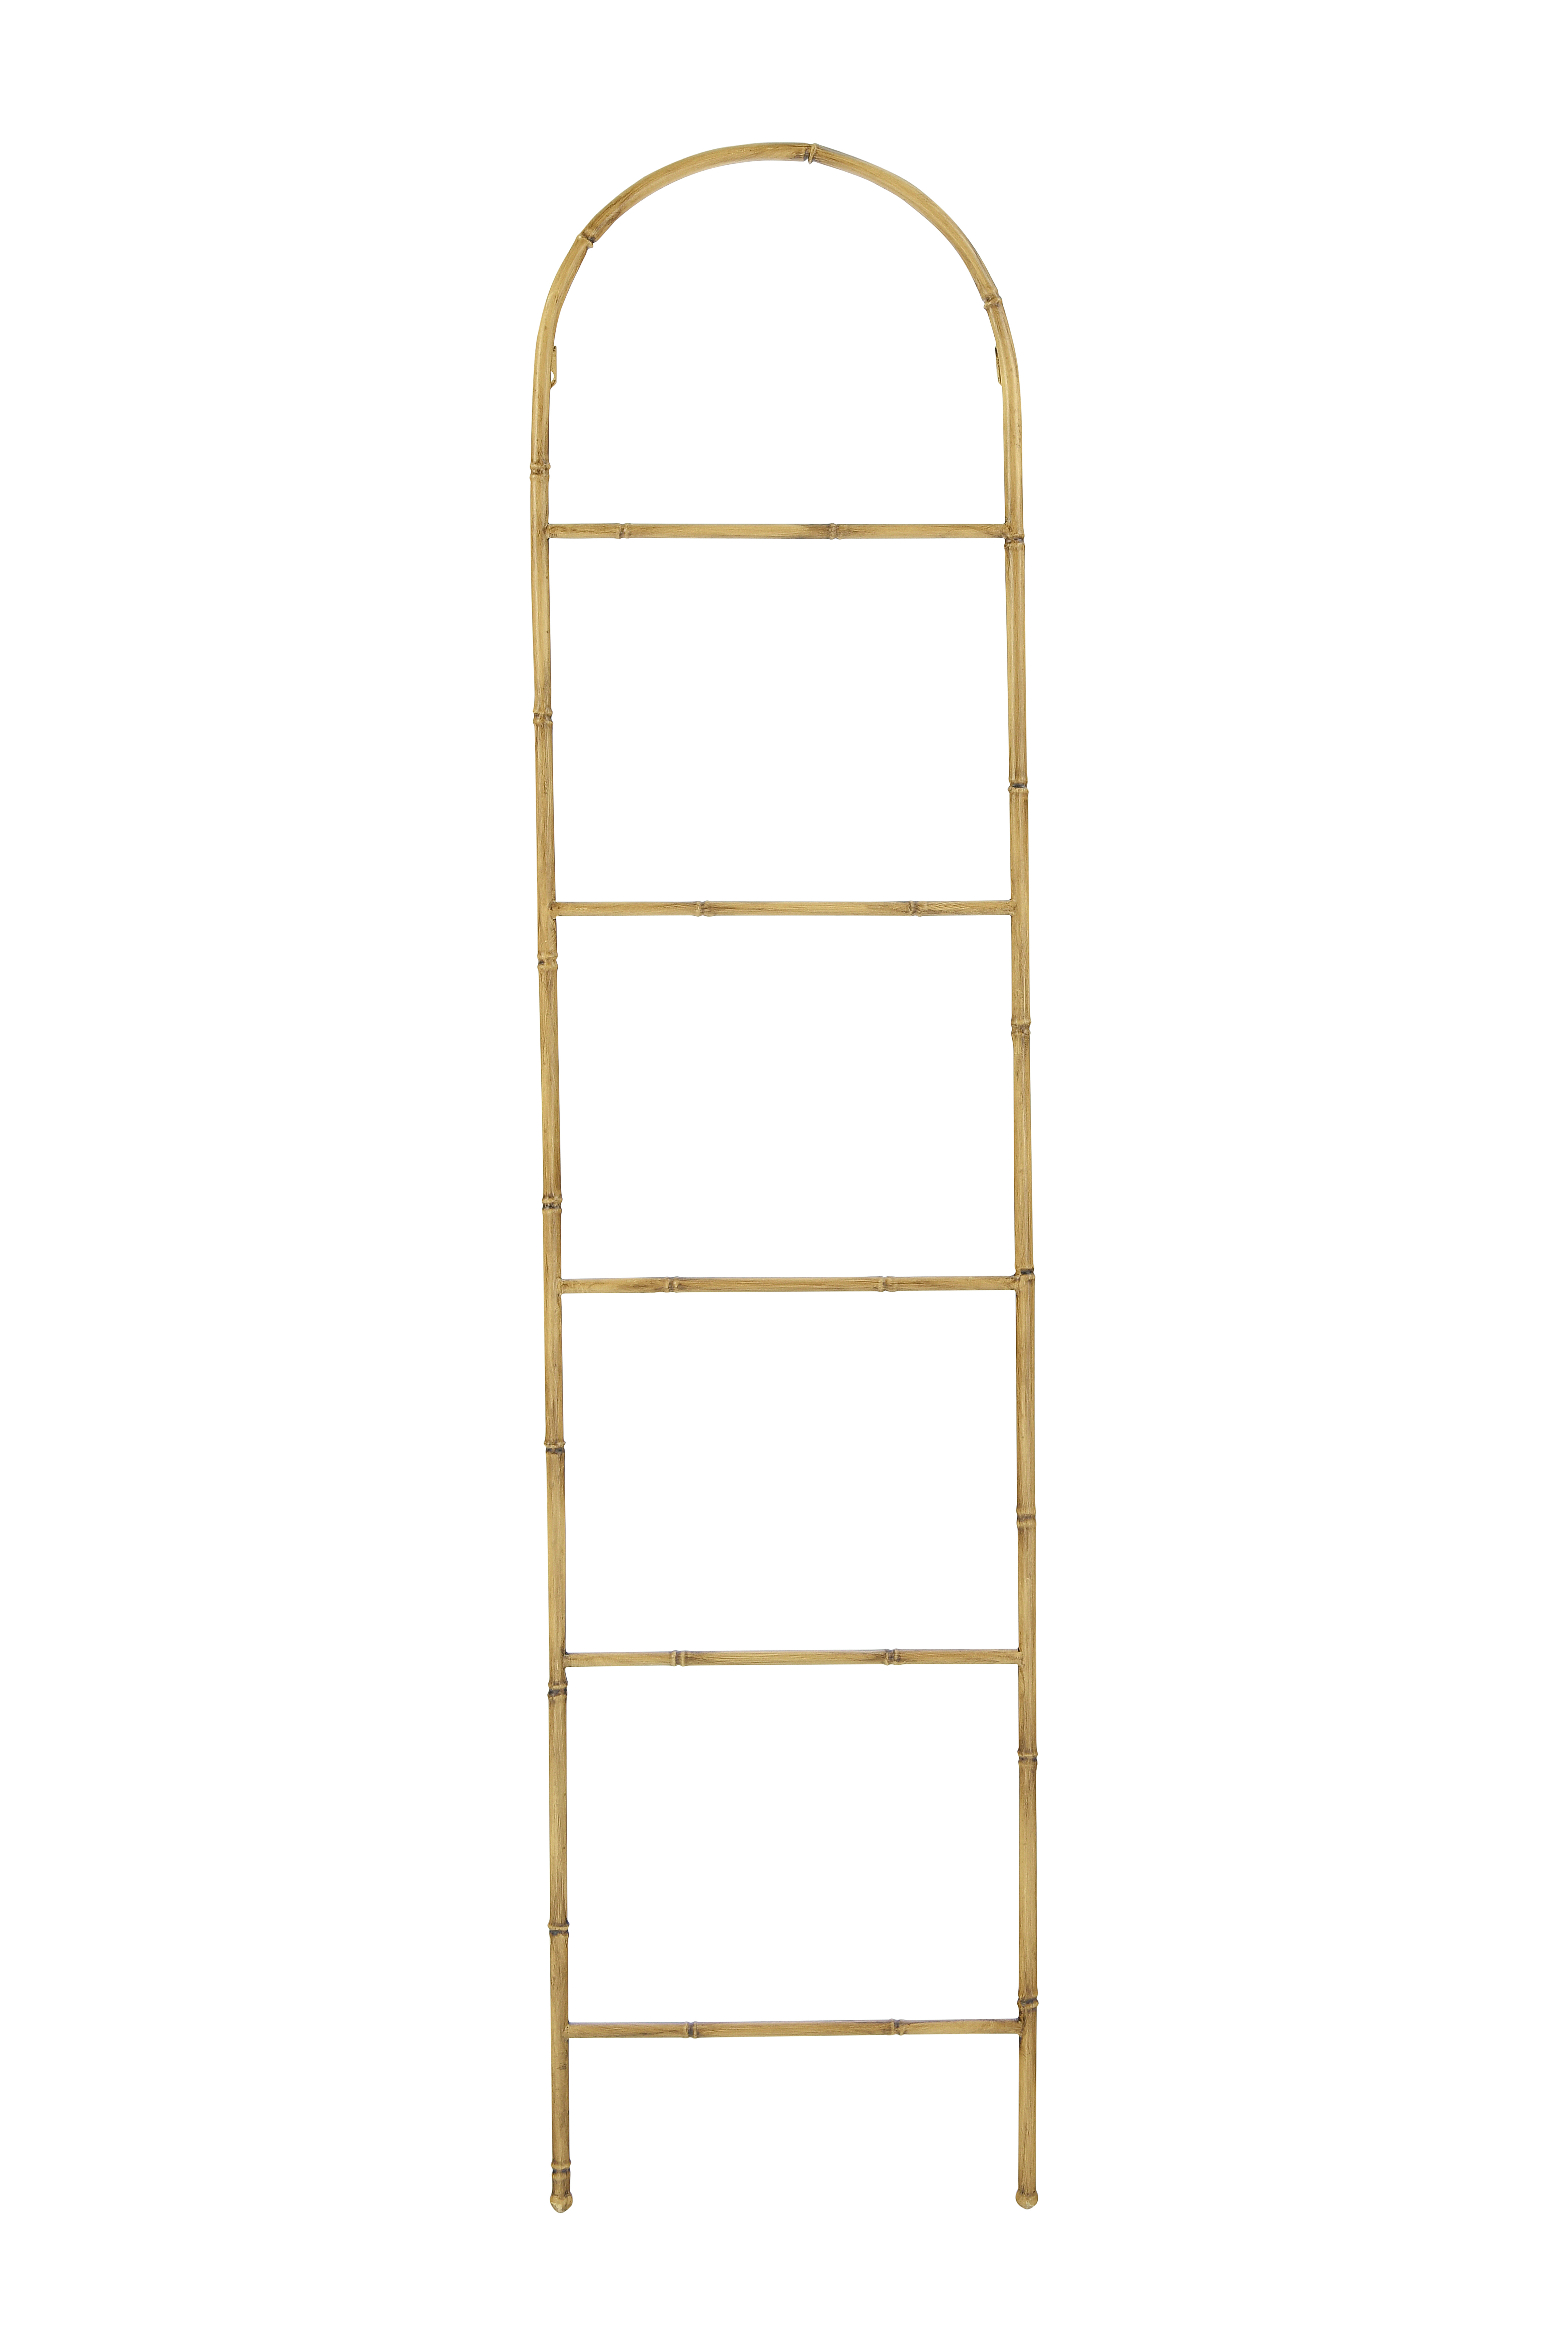 68"H Decorative Metal Ladder with Arched Top & Bamboo Finish - Moss & Wilder